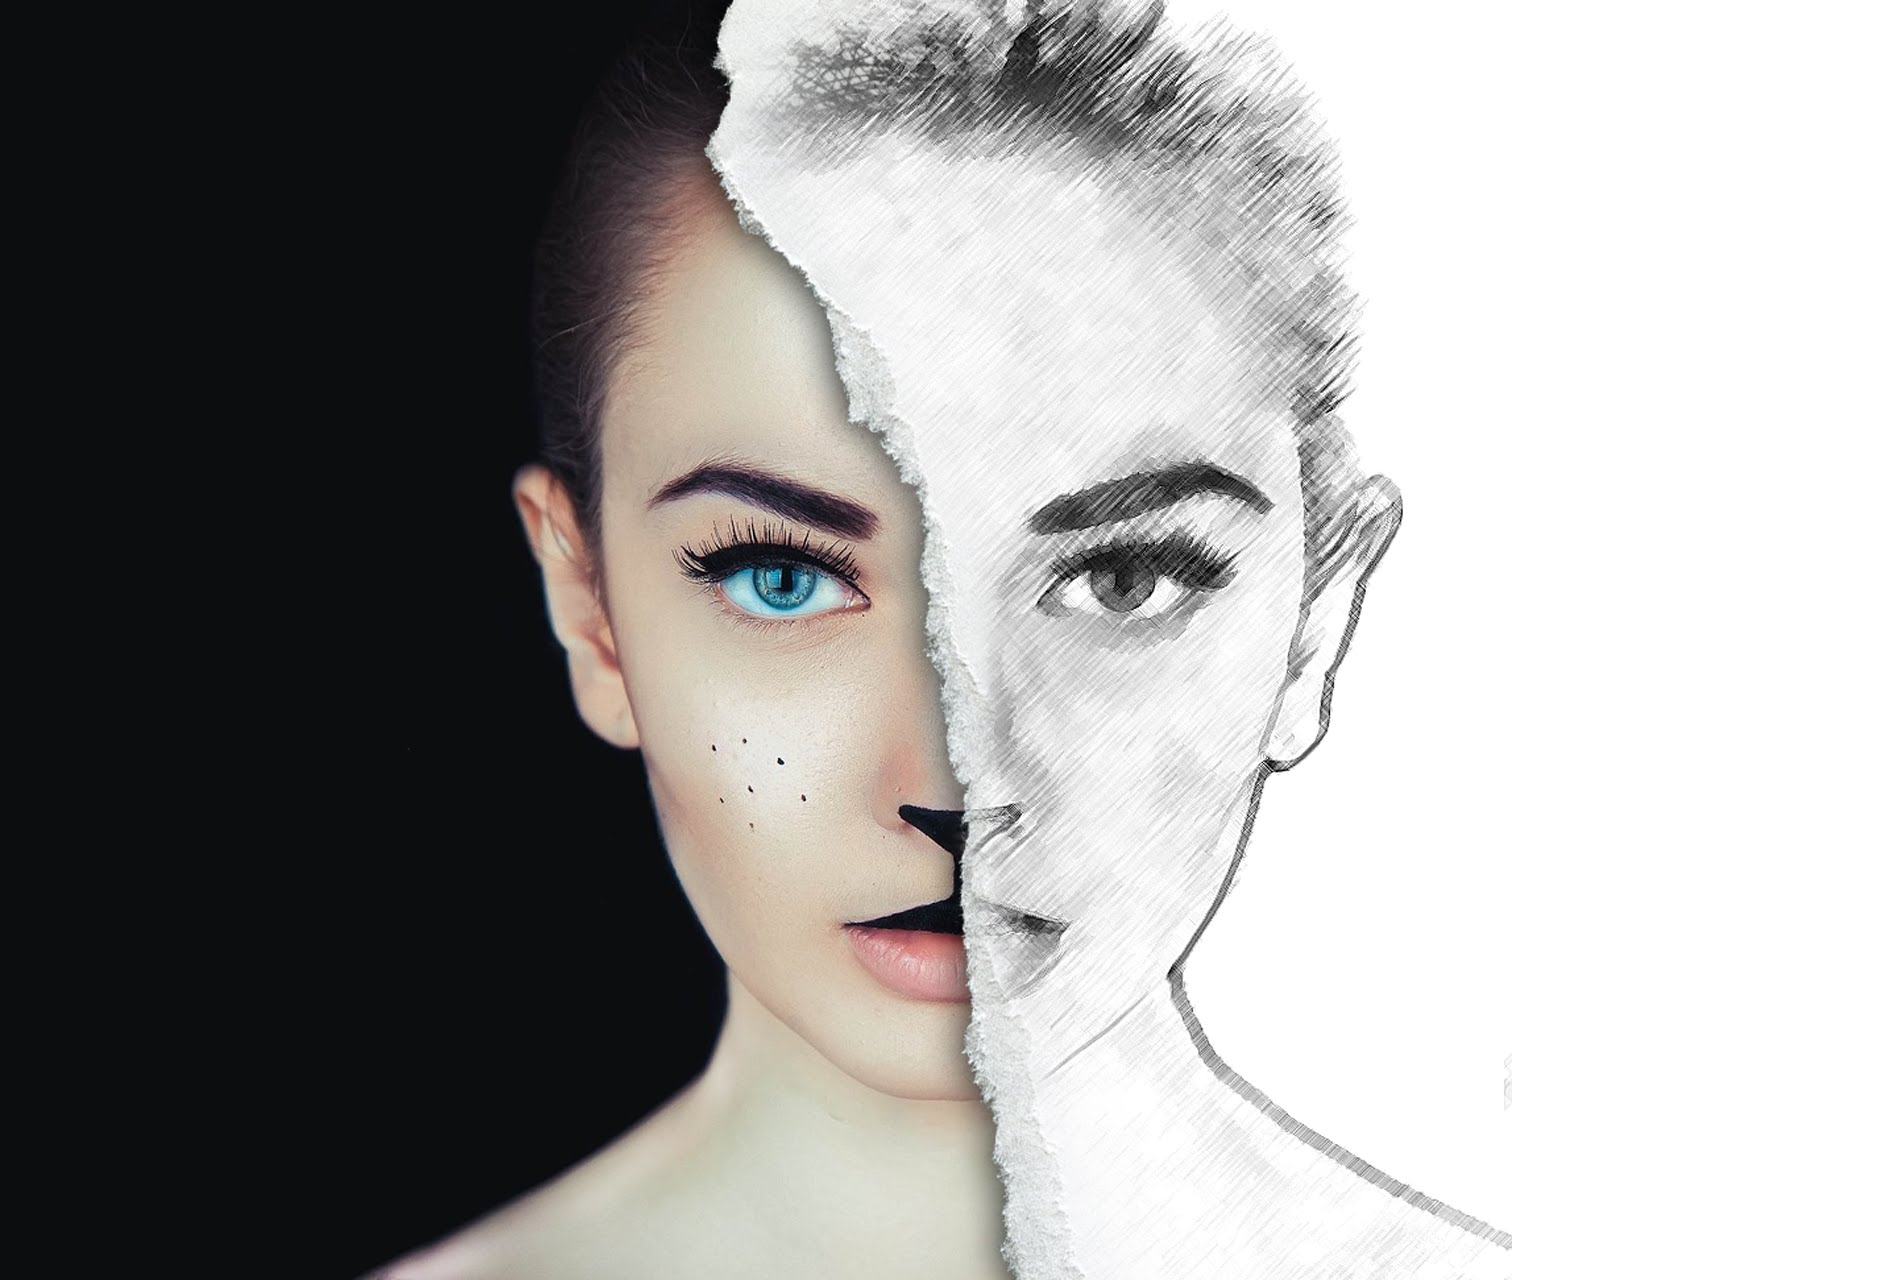 Pencil Drawing Effect ( Photoshop Action )